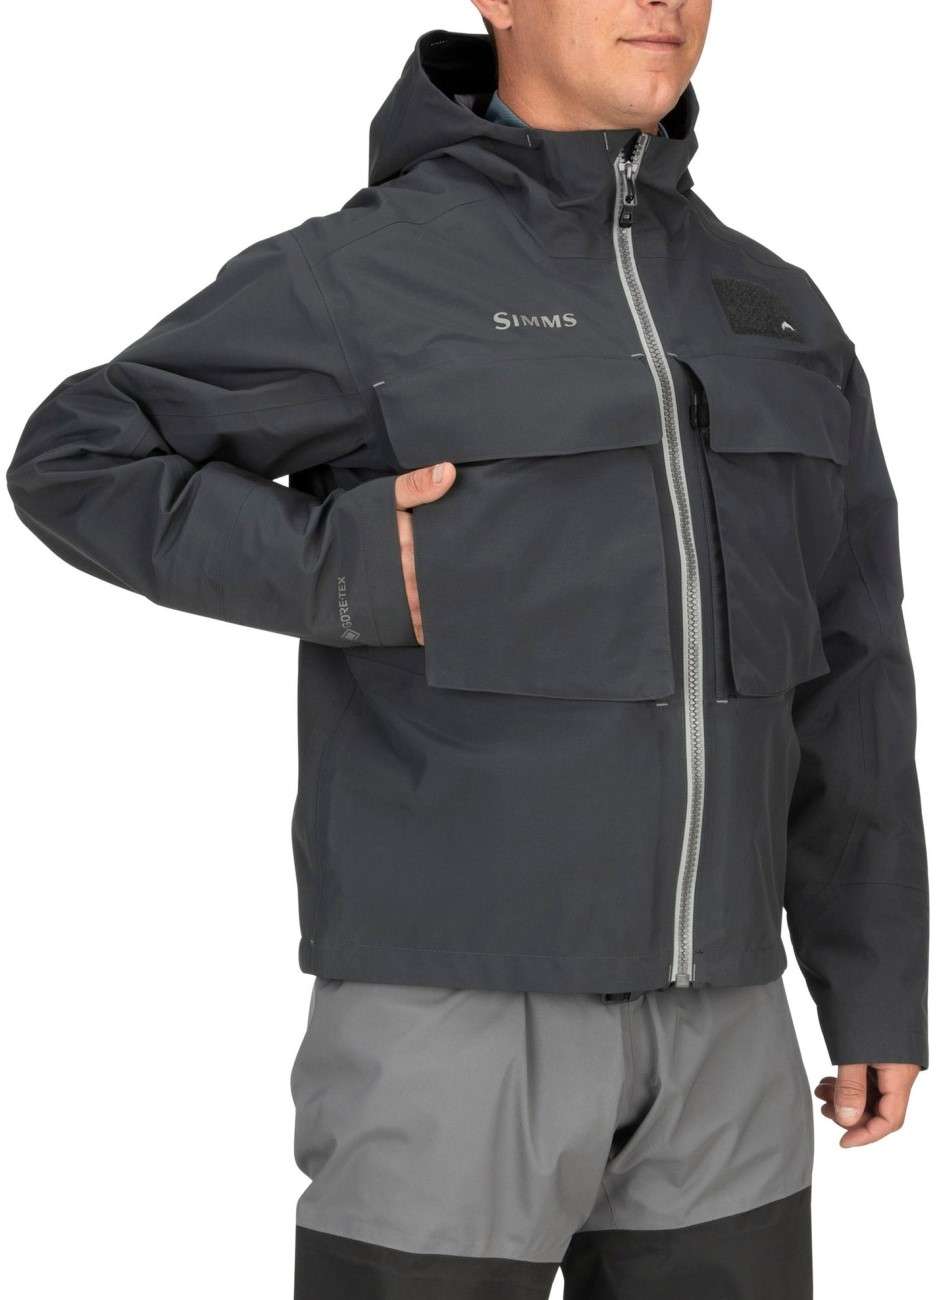 https://i.tackledirect.com/images/inset1/simms-13155-003-60-mens-guide-classic-wading-jacket.jpg